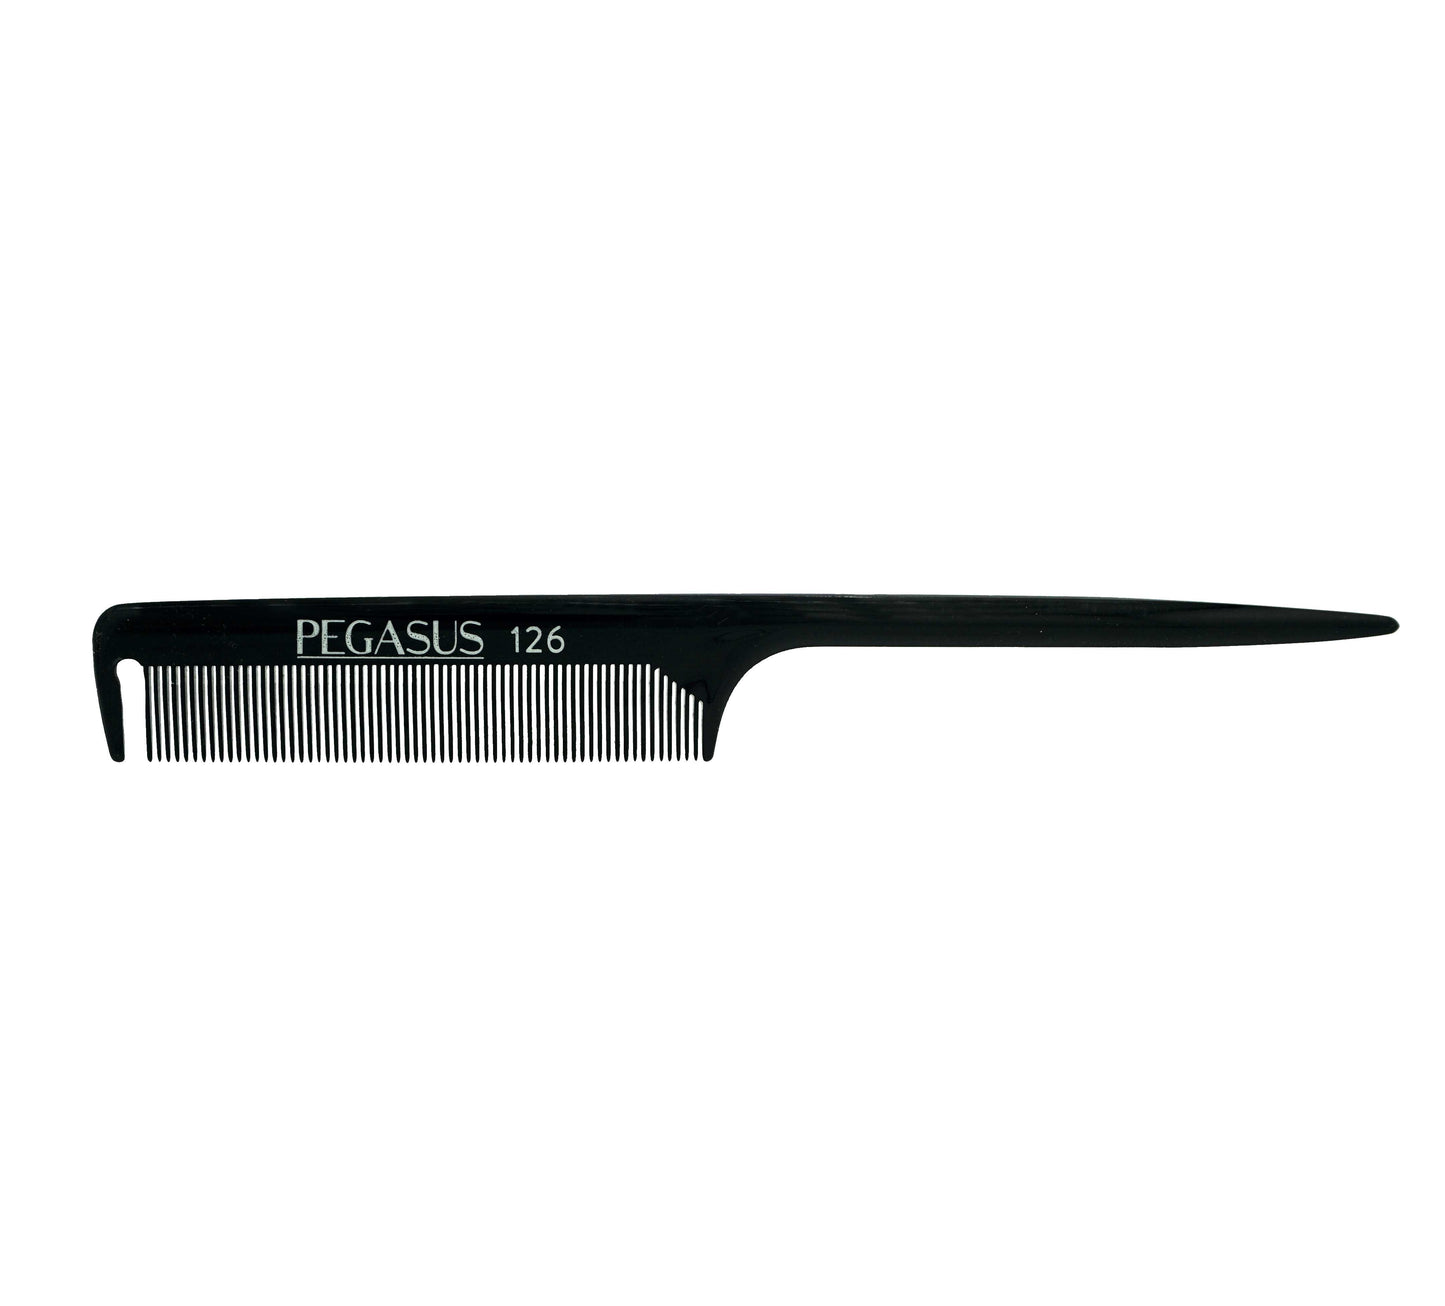 Pegasus 126, 8.25in Hard Rubber Fine Tooth Rat Tail Comb with Sectioning, Seamless, Anti Static, Heat and Chemically Resistant, Great for Parting, Coloring Hair | Peines de goma dura - Black